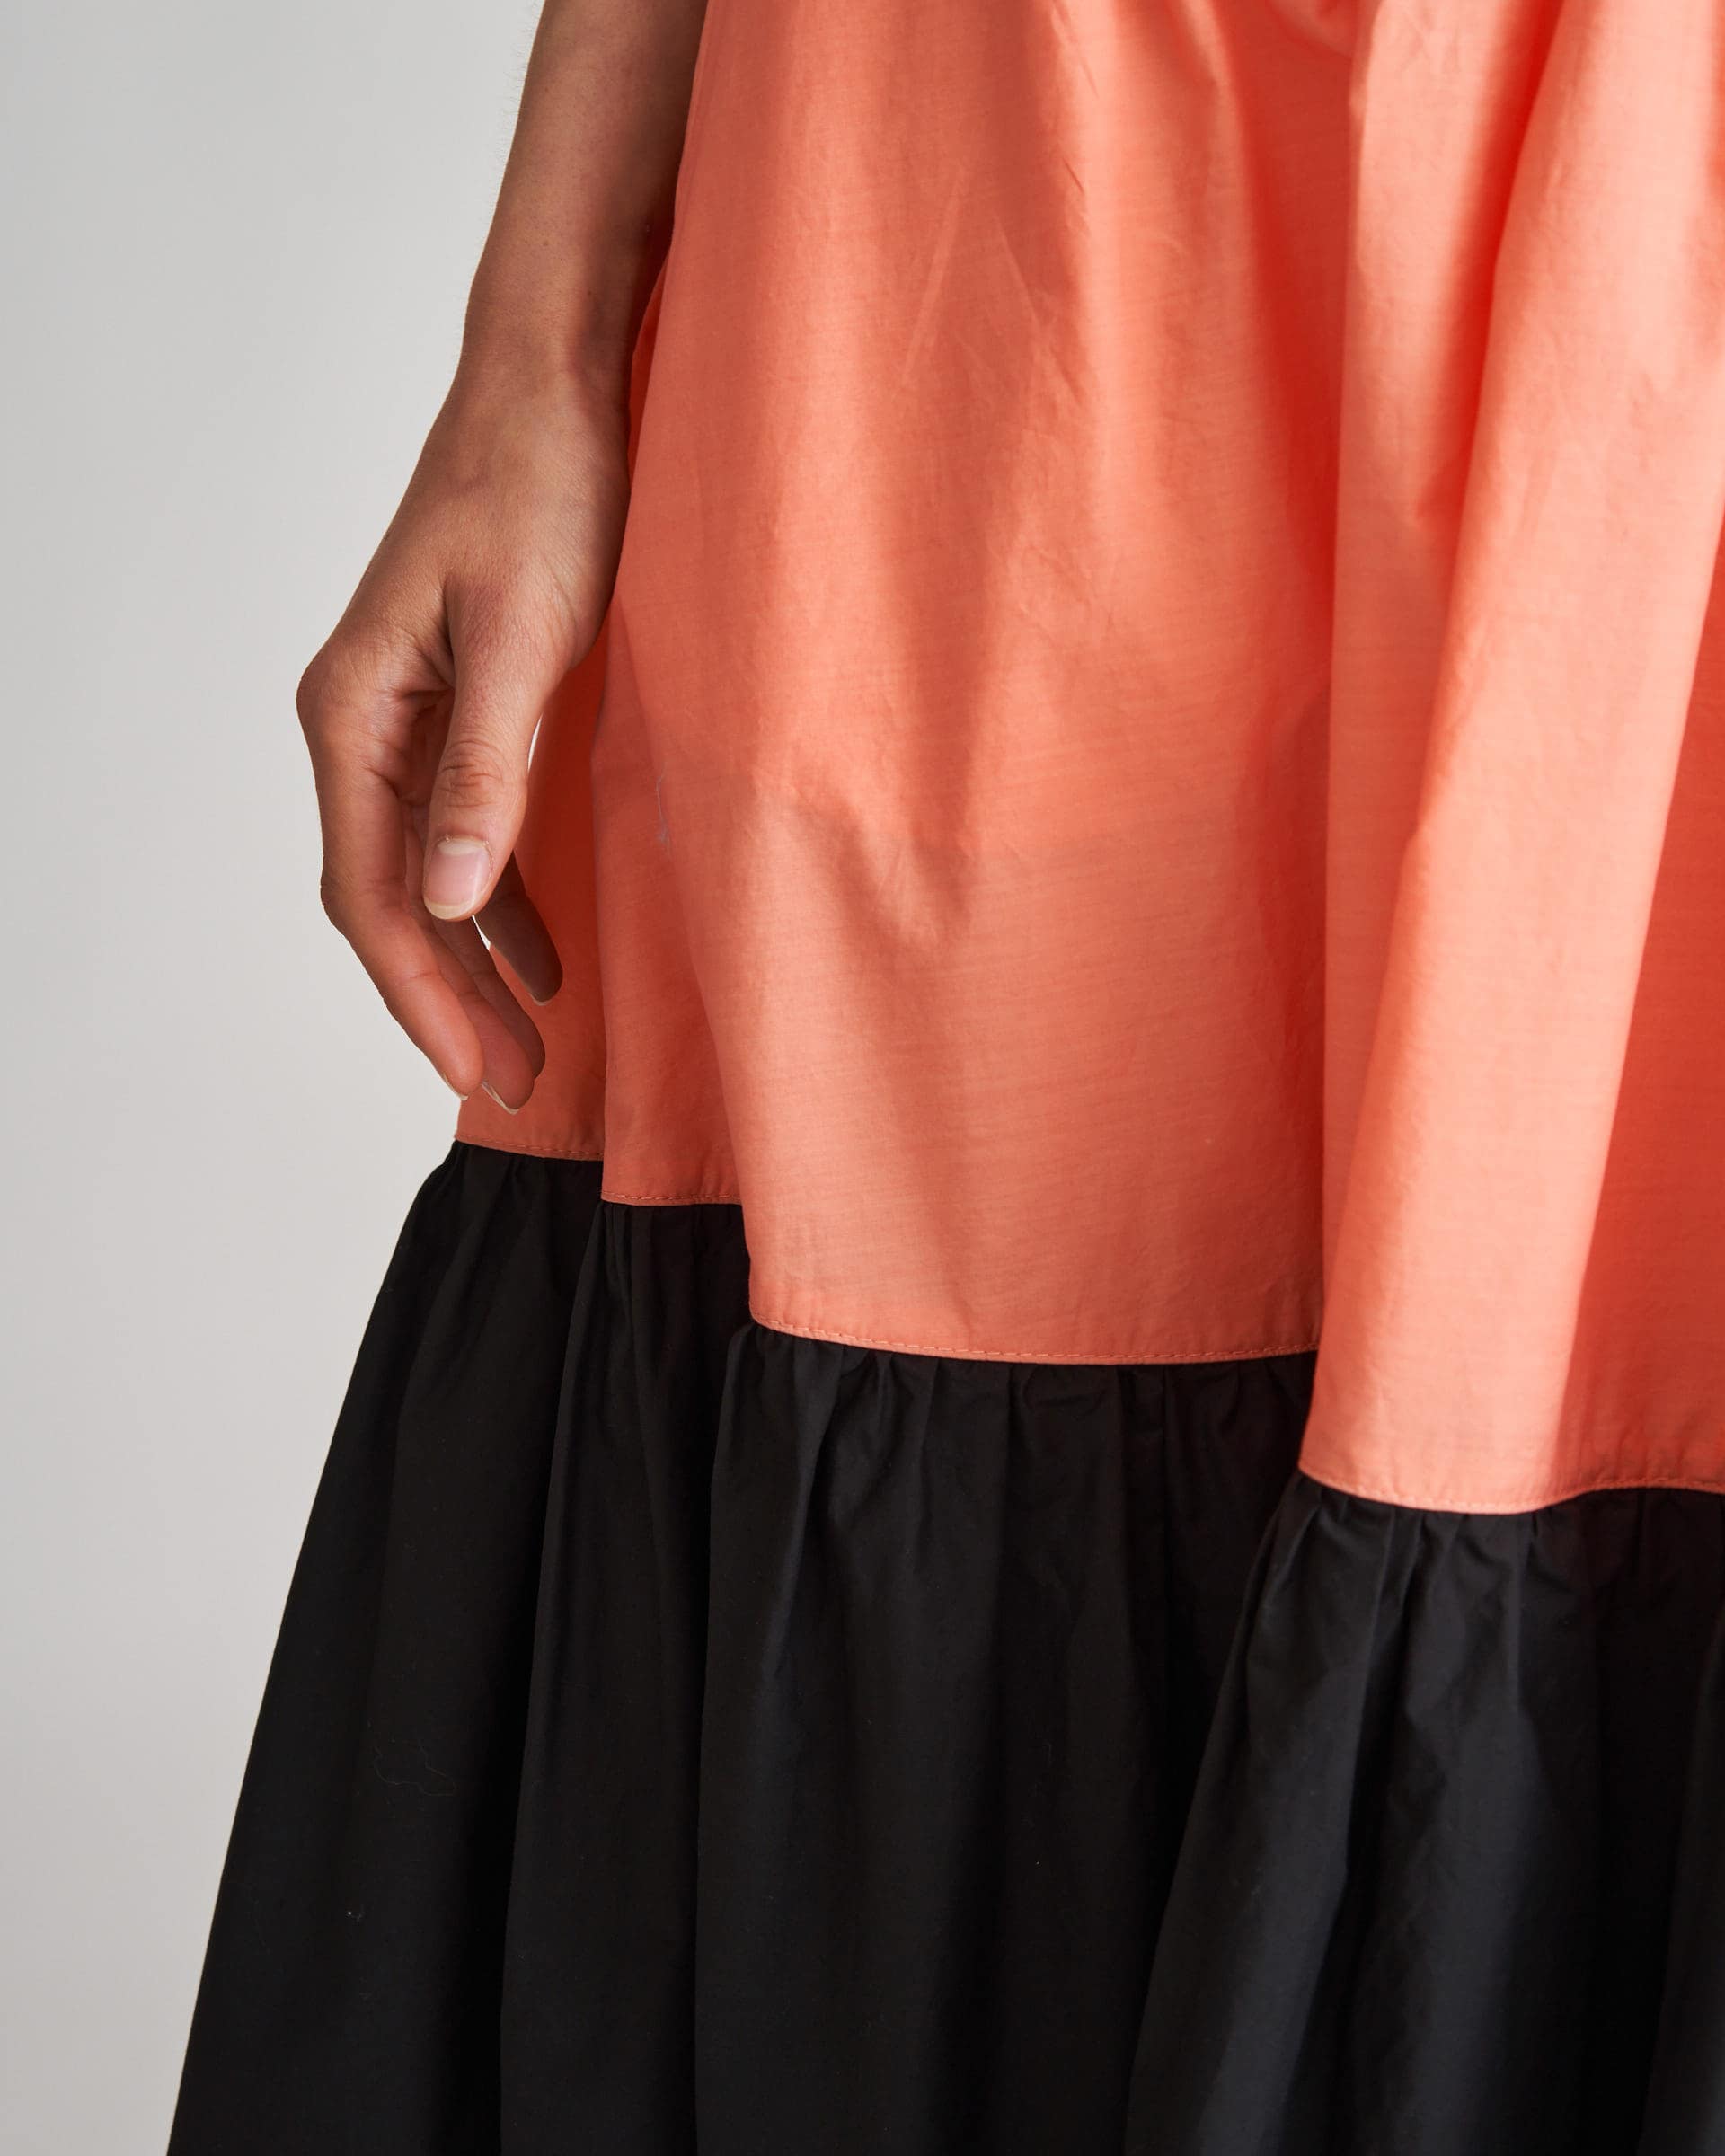 The Market Store | Two-tone Flounce Skirt